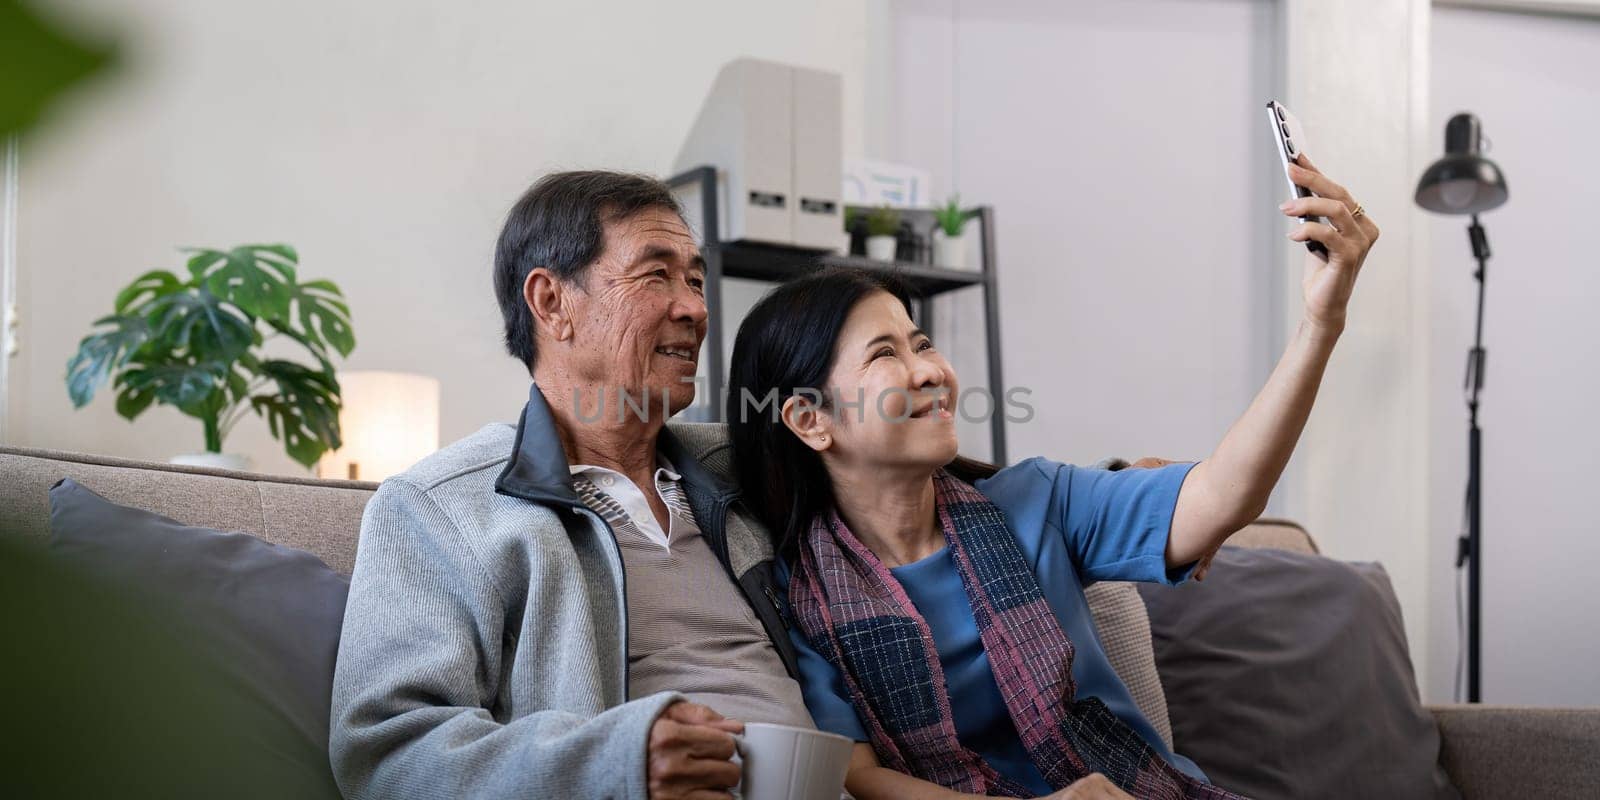 Happy old couple elderly taking selfie on cellphone, senior mature spouses wife and husband laughing holding phone make self portrait on smartphone camera by nateemee